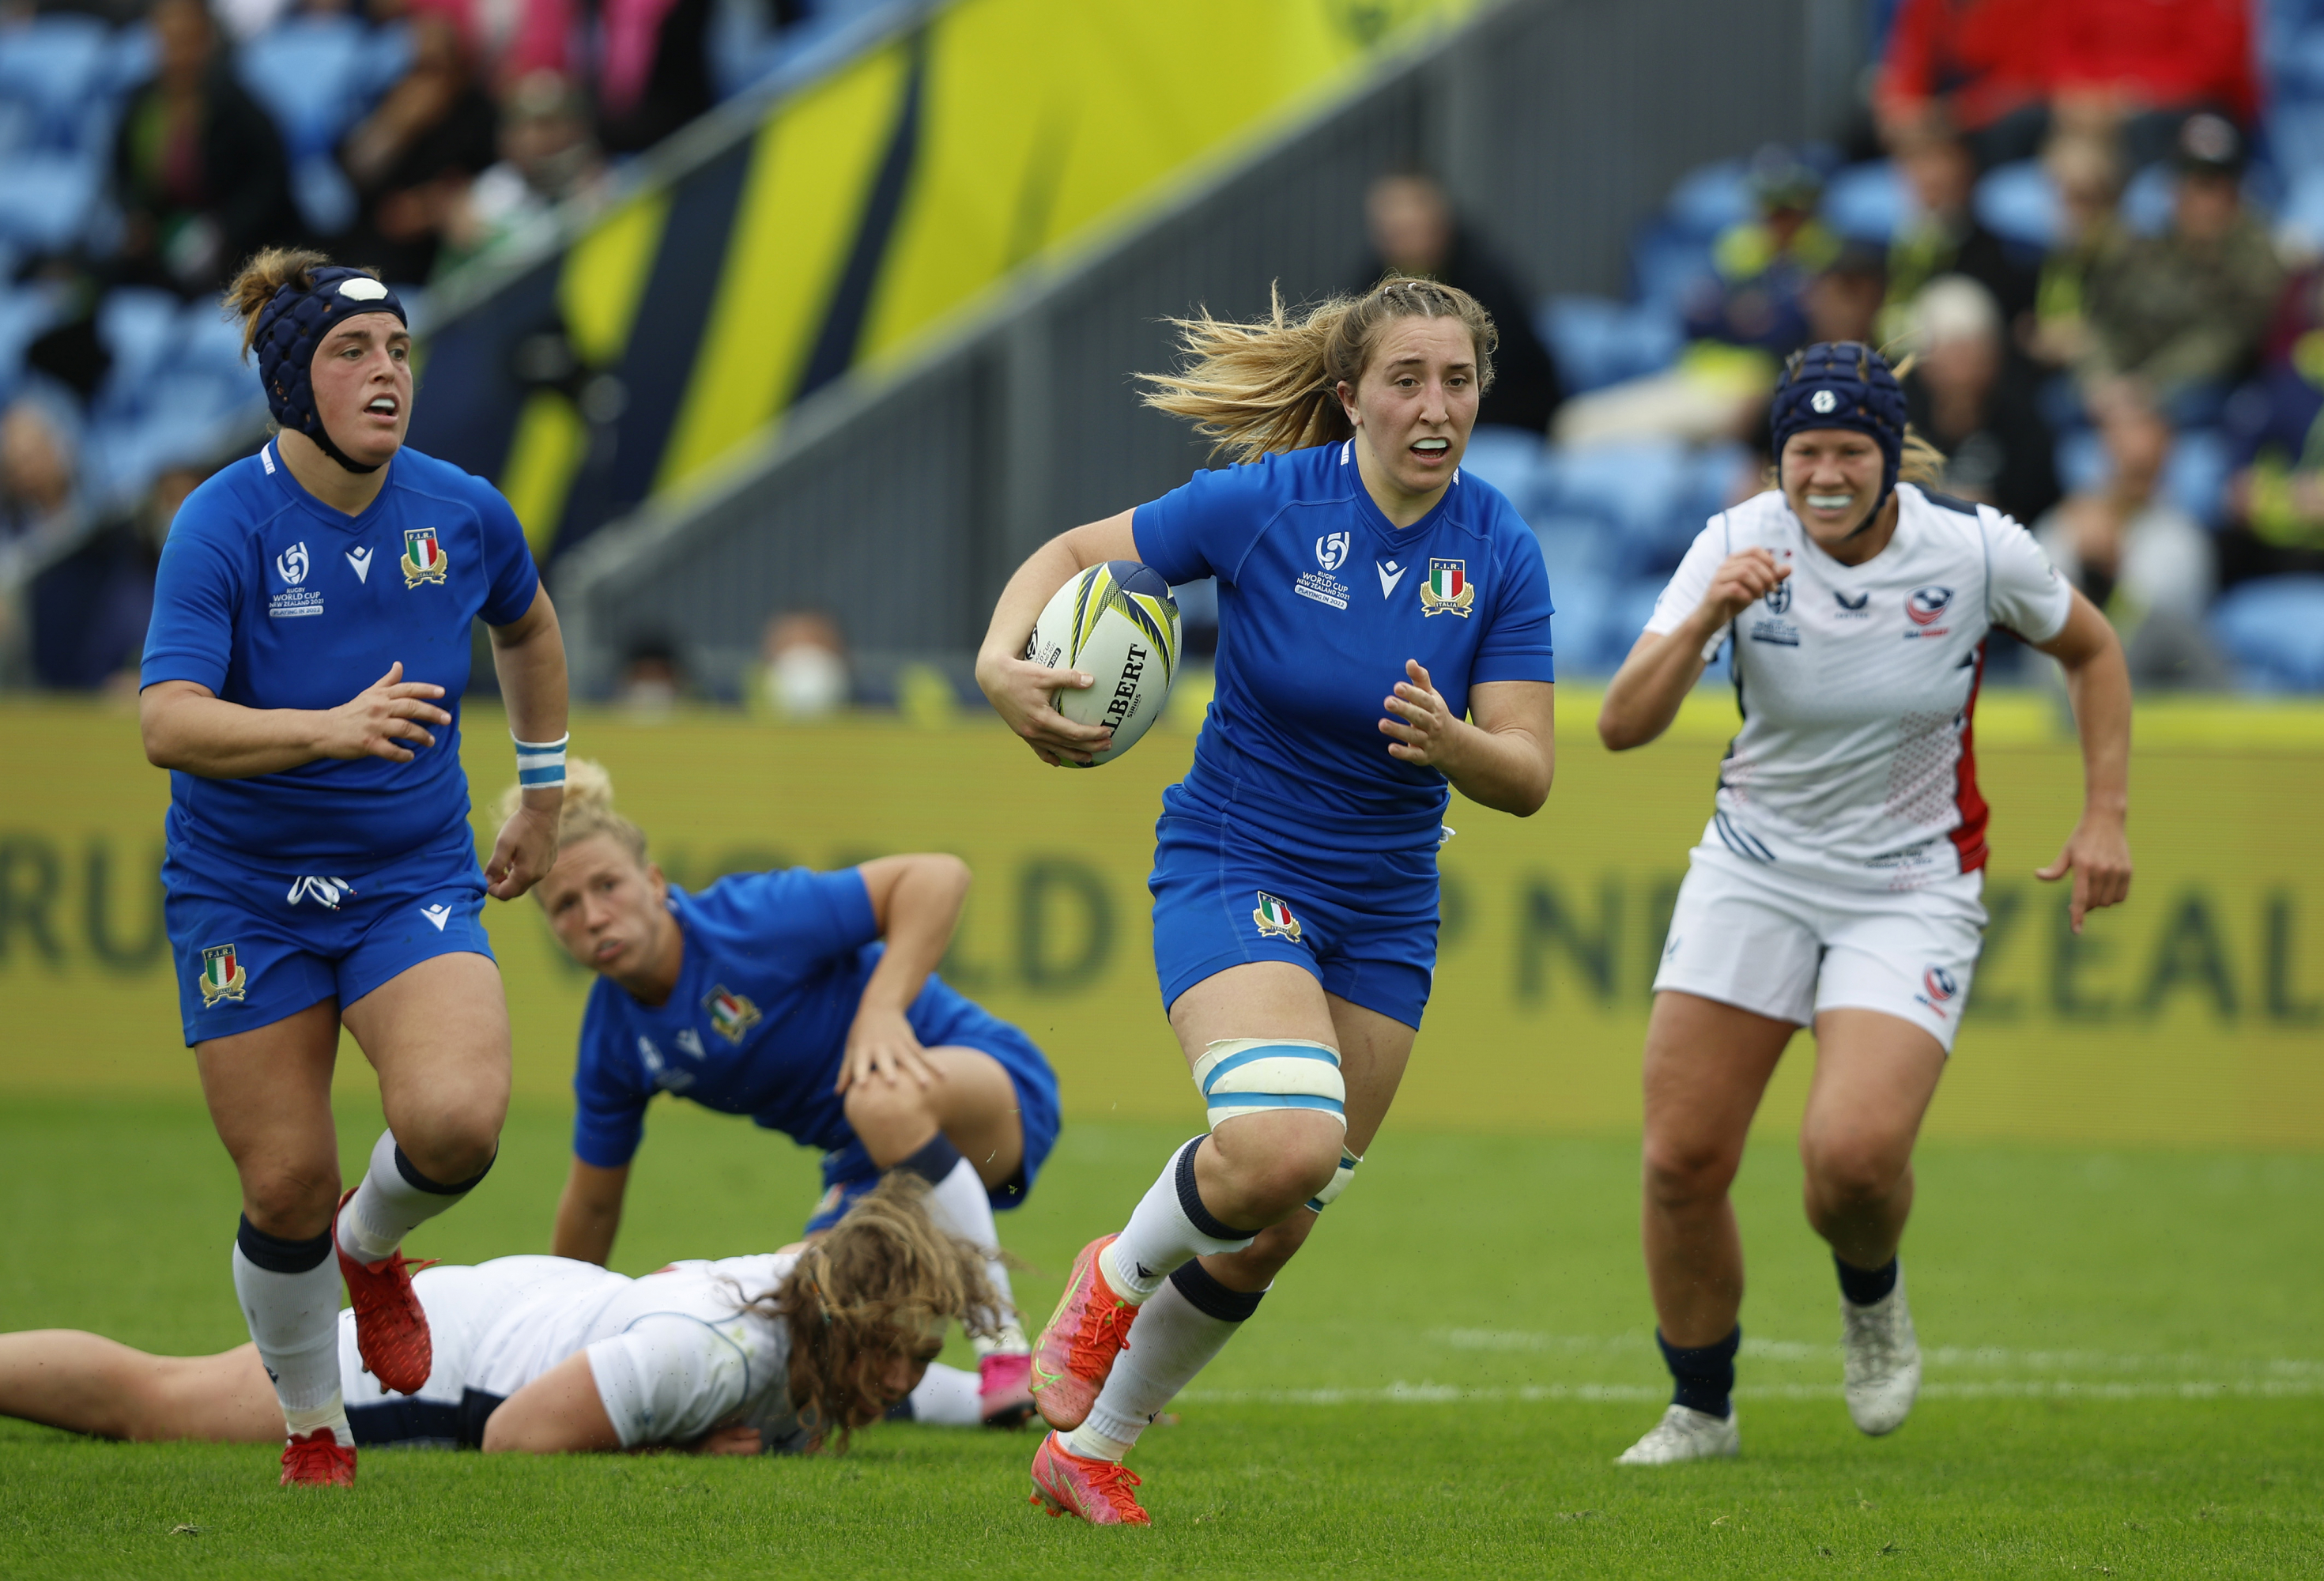 WHANGAREI, NEW ZEALAND - OCTOBER 09: Francesca Sgorbini of Italy in action during the Pool B Rugby World Cup 2021 New Zealand match between the United States and Italy at Northland Events Centre on October 09, 2022, in Whangarei, New Zealand. (Photo by Greg Bowker/Getty Images)